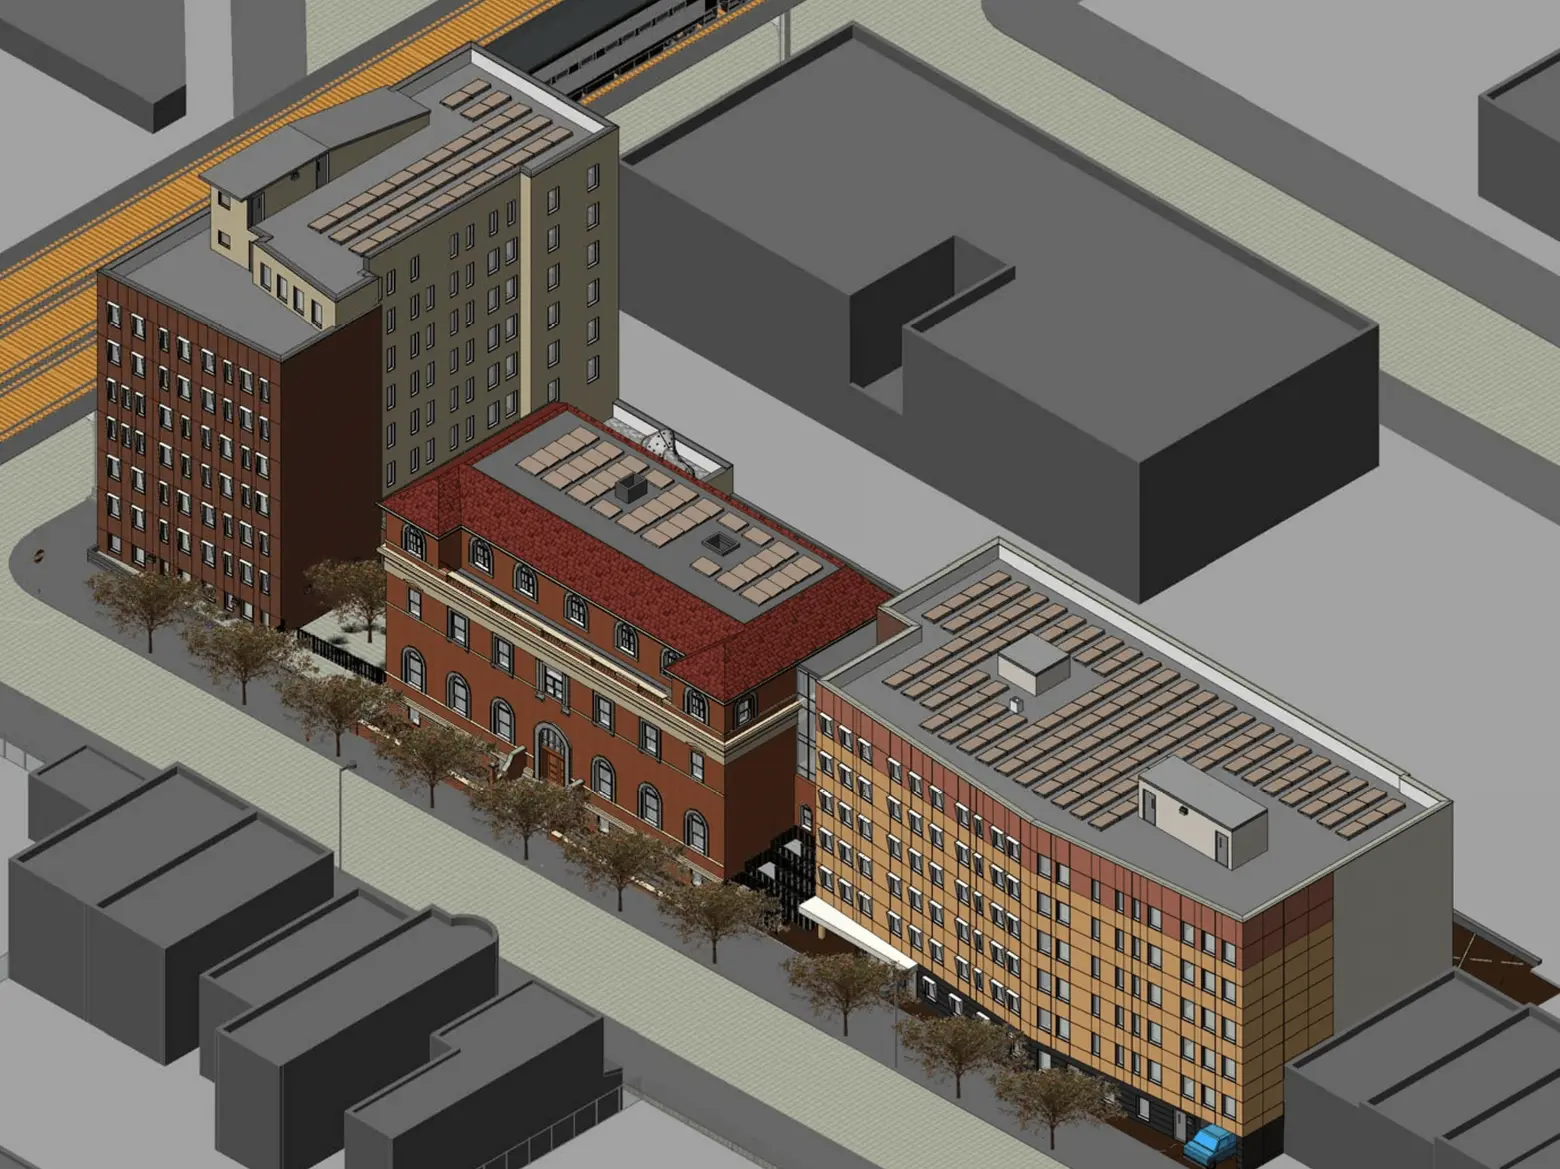 Lottery opens for 63 affordable units at former Bushwick convent, starting at $519/month